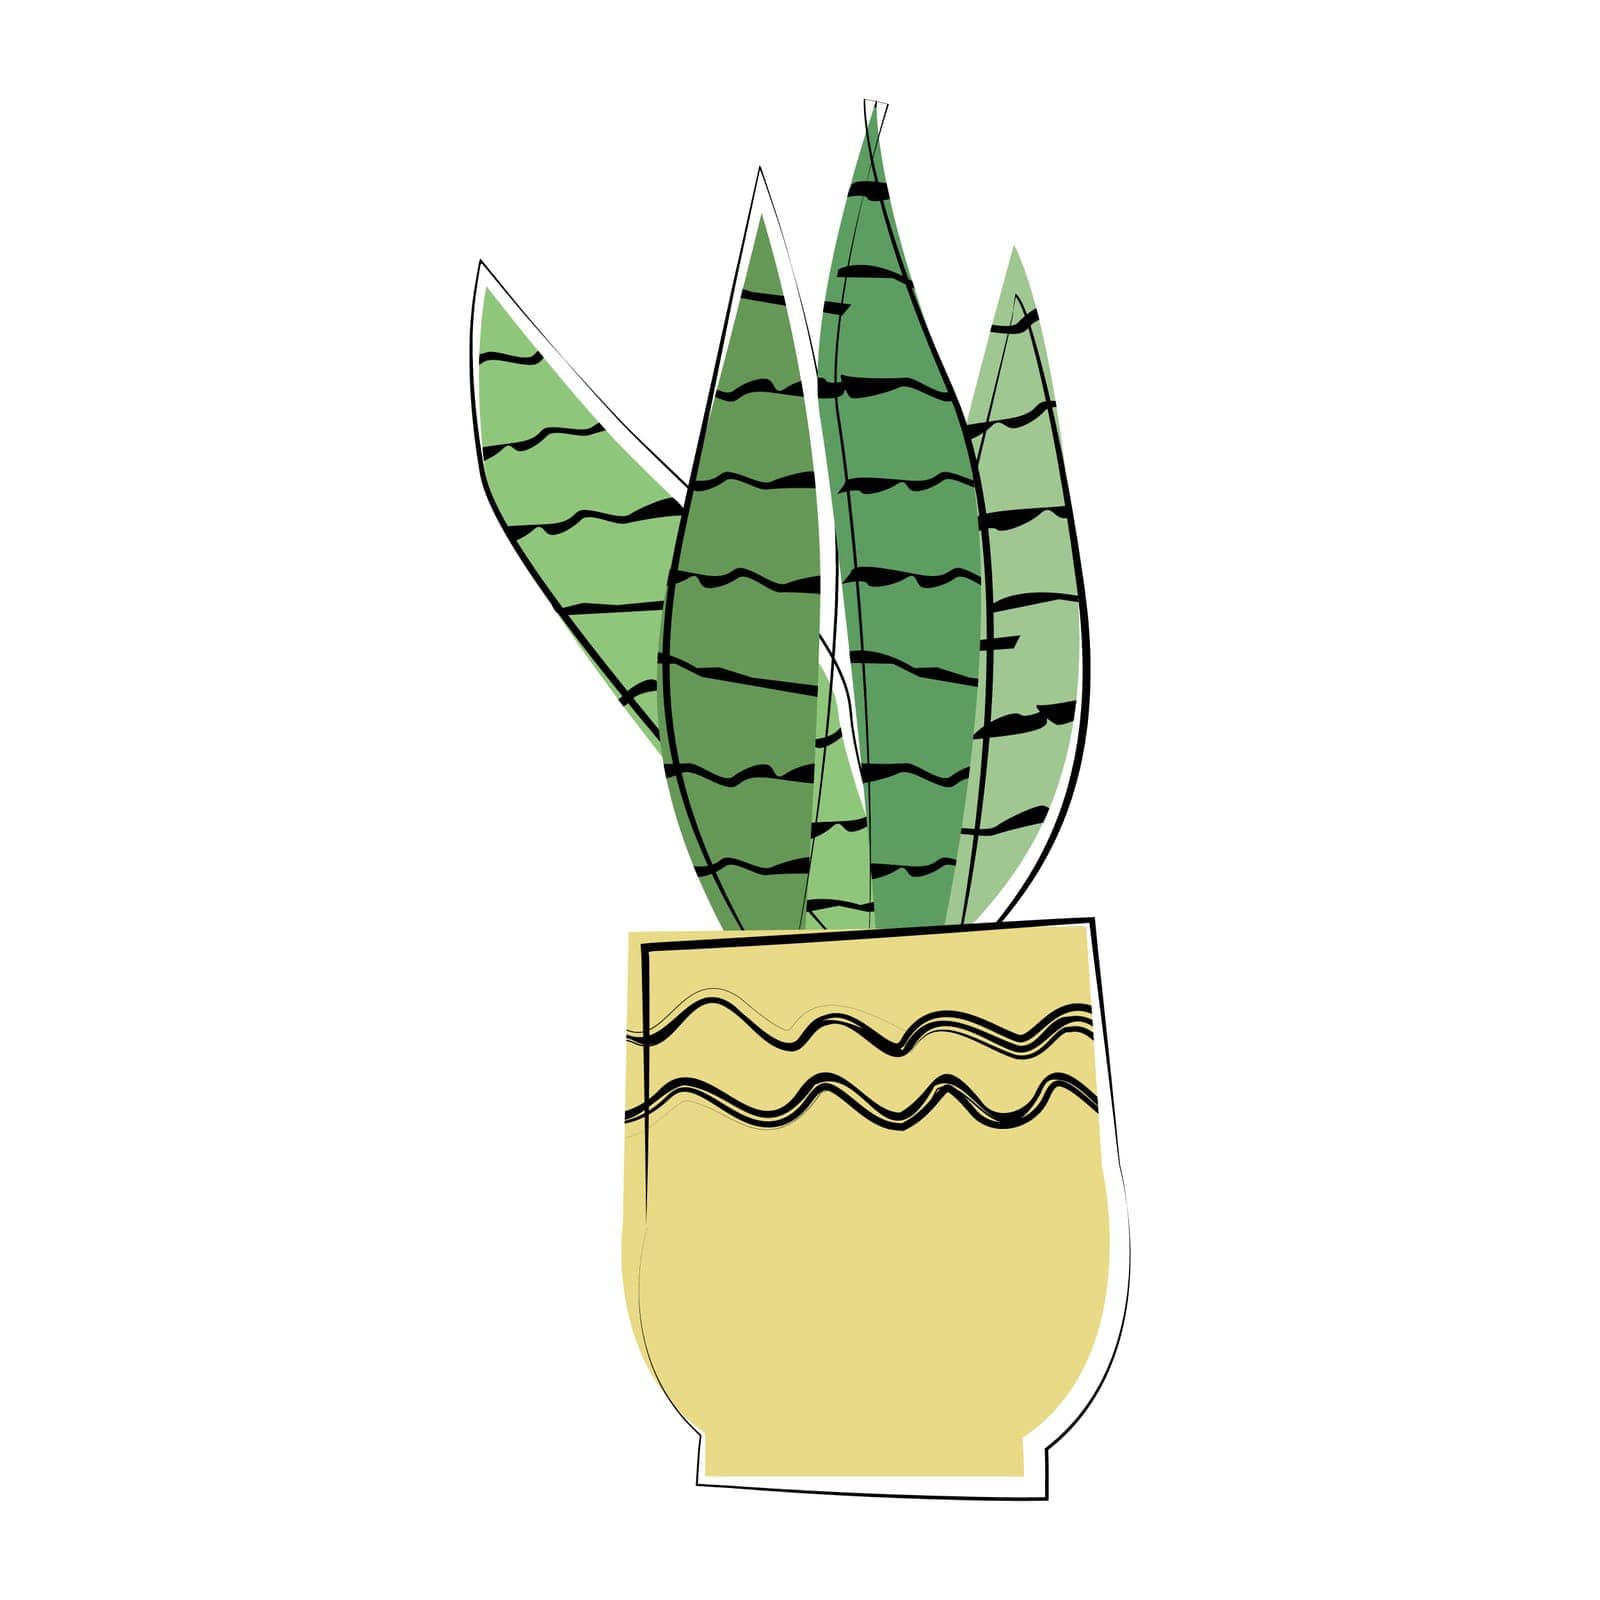 snace plant in a flowerpot in a hand drawn style by Bissekeyeva